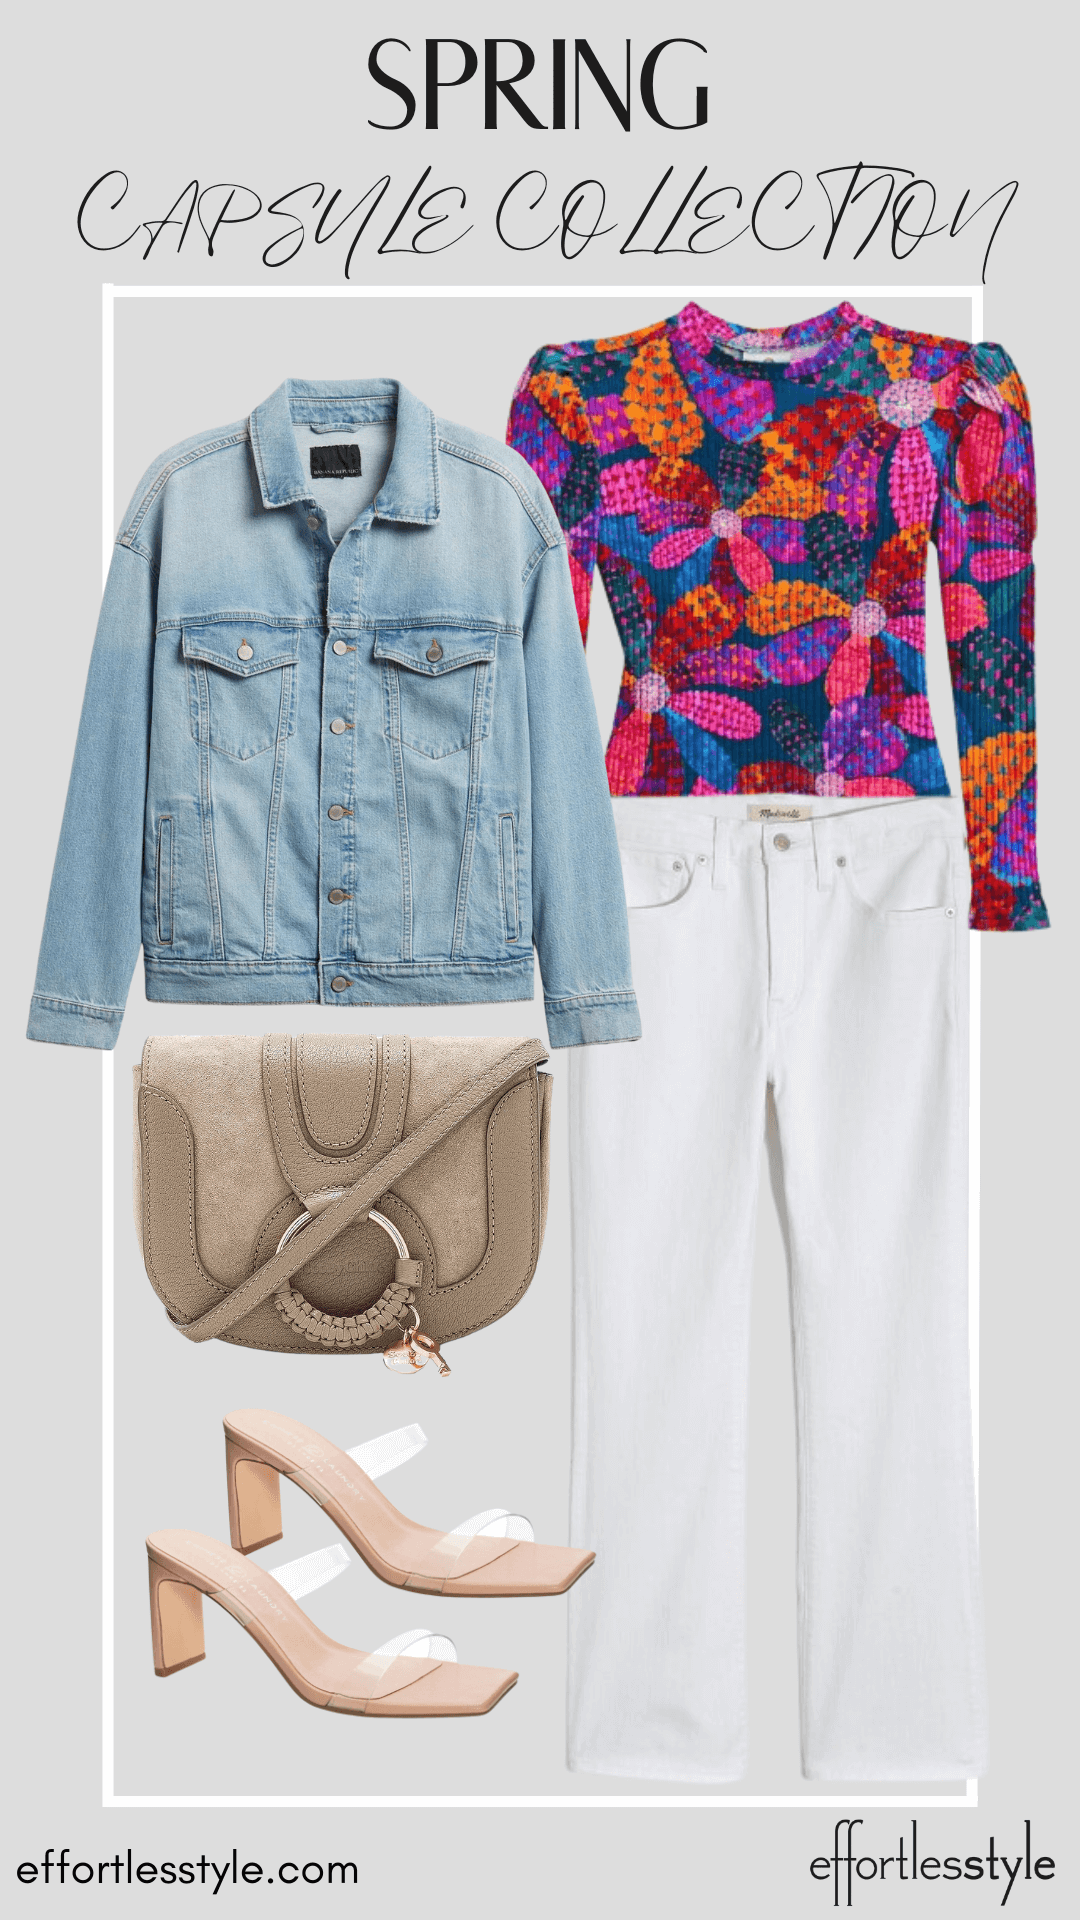 How To Wear Our Spring Capsule Wardrobe - Part 1 Printed Bodysuit & Denim Jacket & White Jeans how to wear bright colors with white jeans how to style a denim jacket with white jeans how to wear a jean jacket with your white jeans must have shoes for spring must have accessories for spring